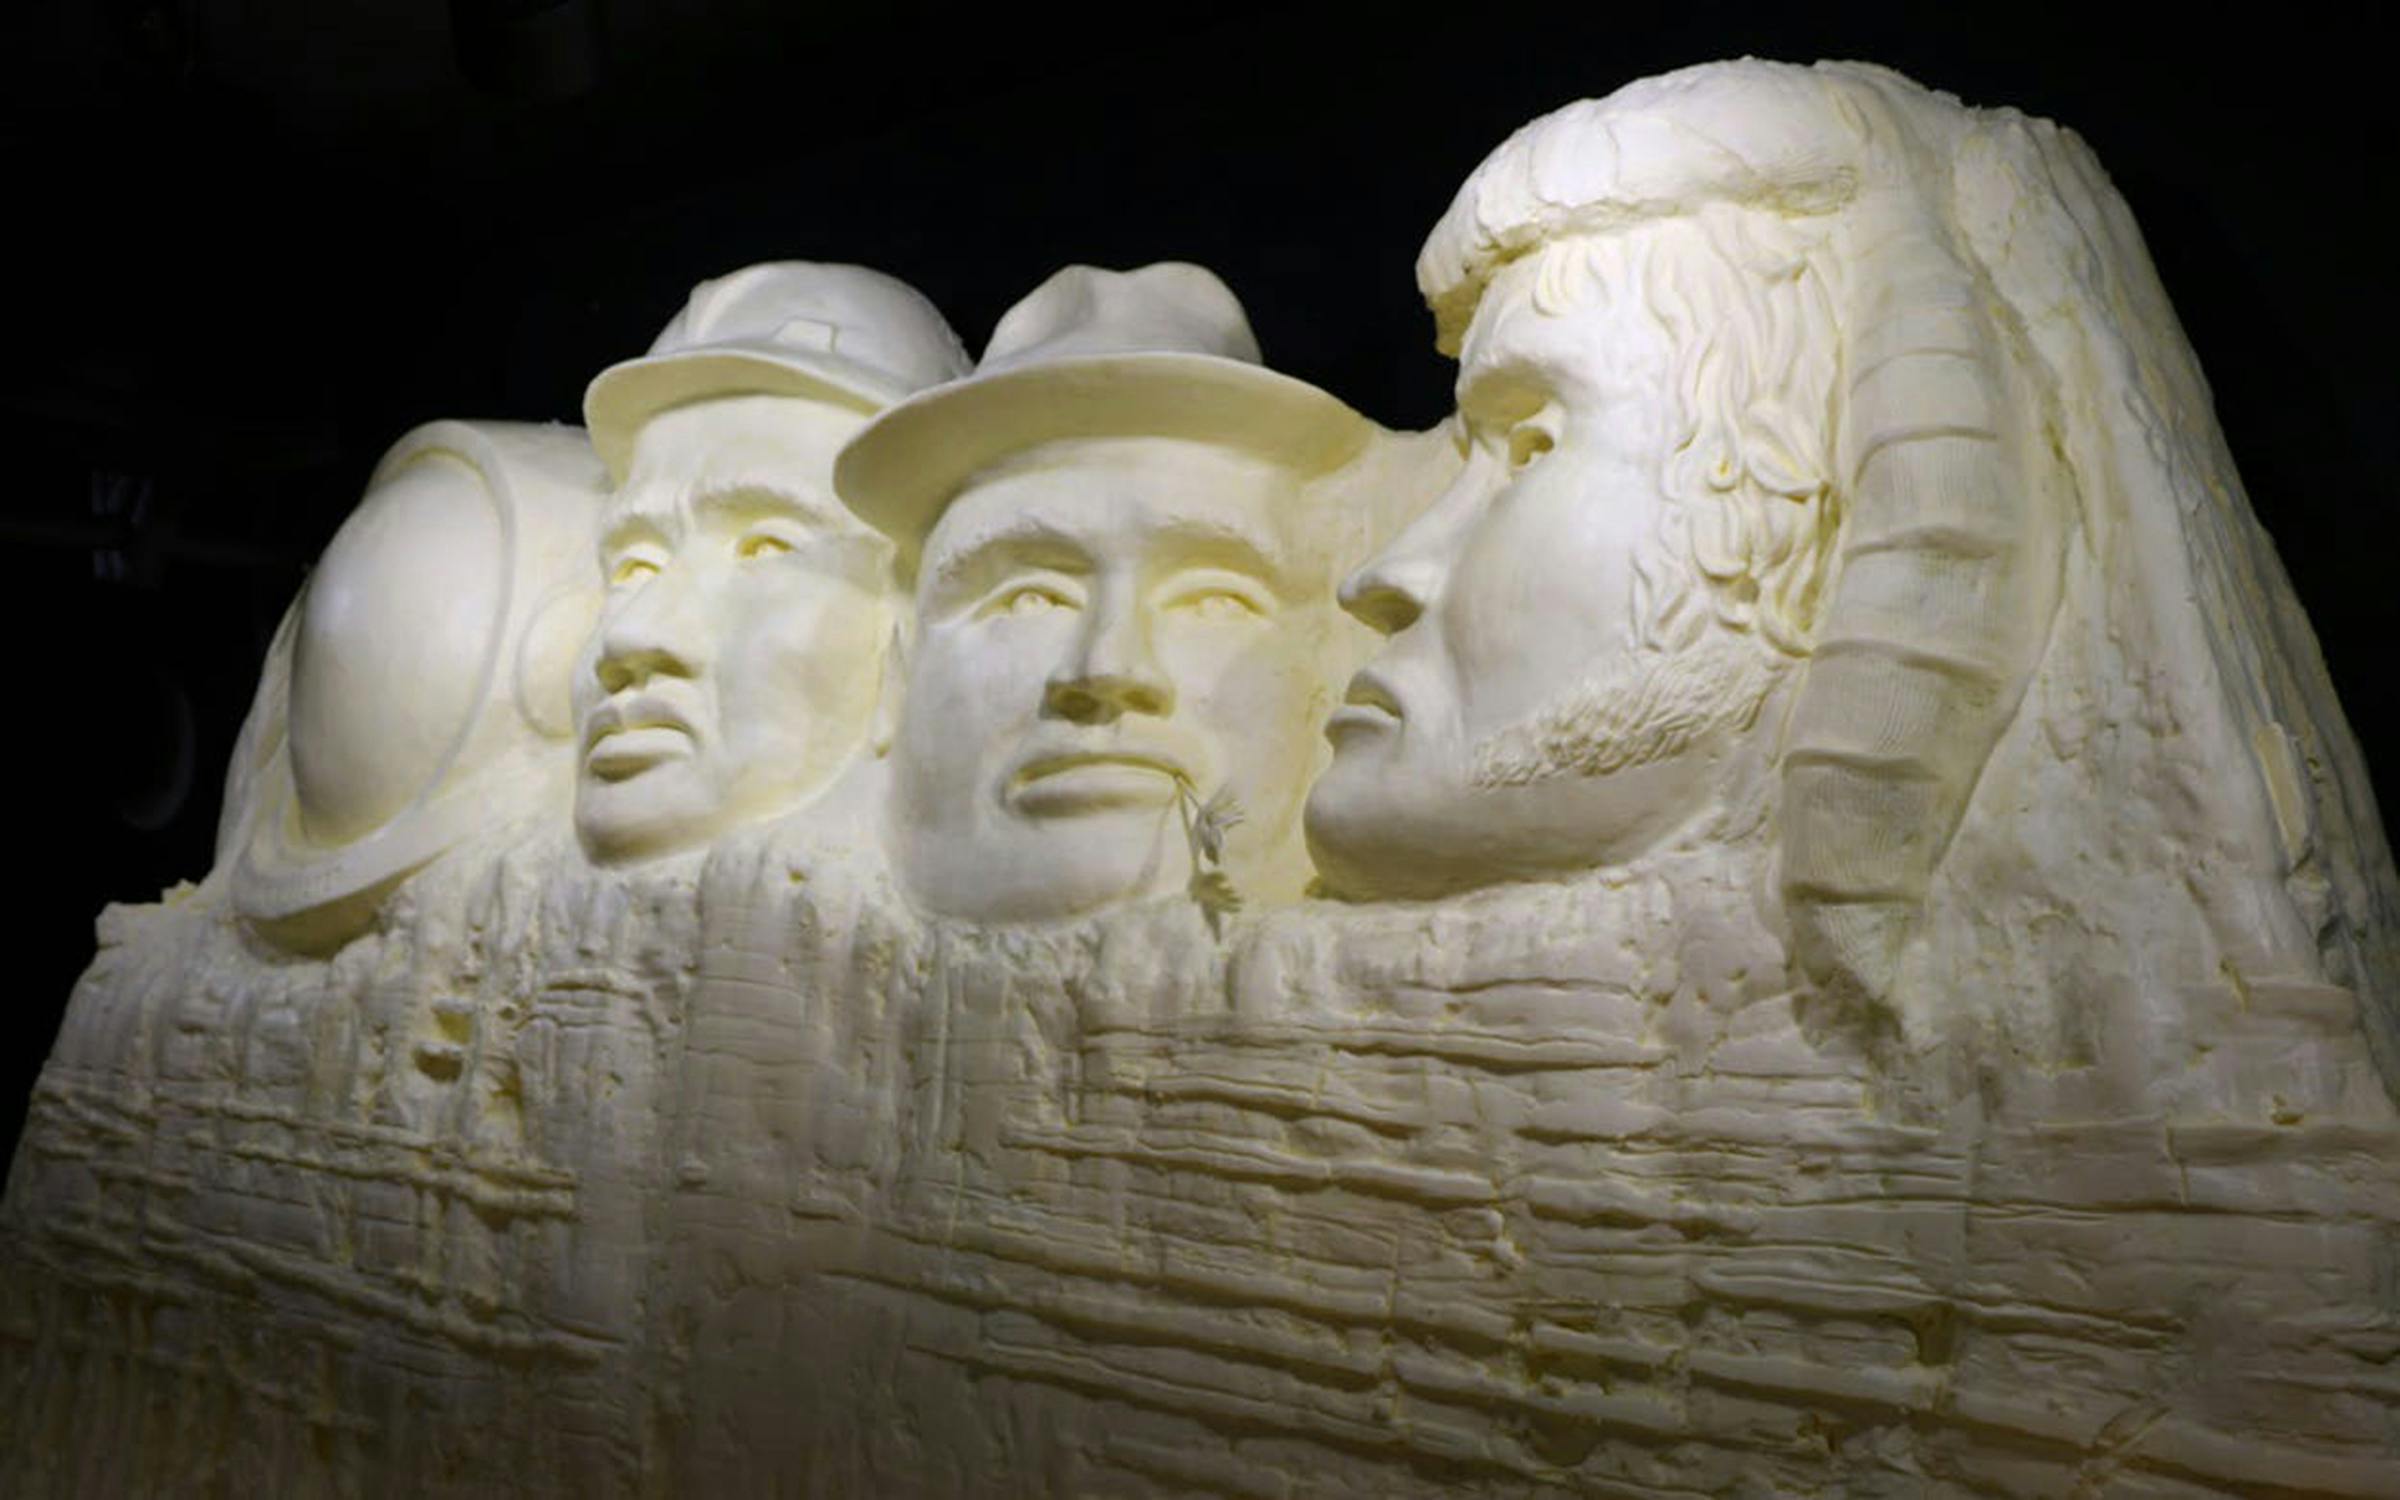 https://img.texasmonthly.com/2020/07/butter-sculpture.jpg?auto=compress&crop=faces&fit=fit&fm=pjpg&ixlib=php-3.3.1&q=45